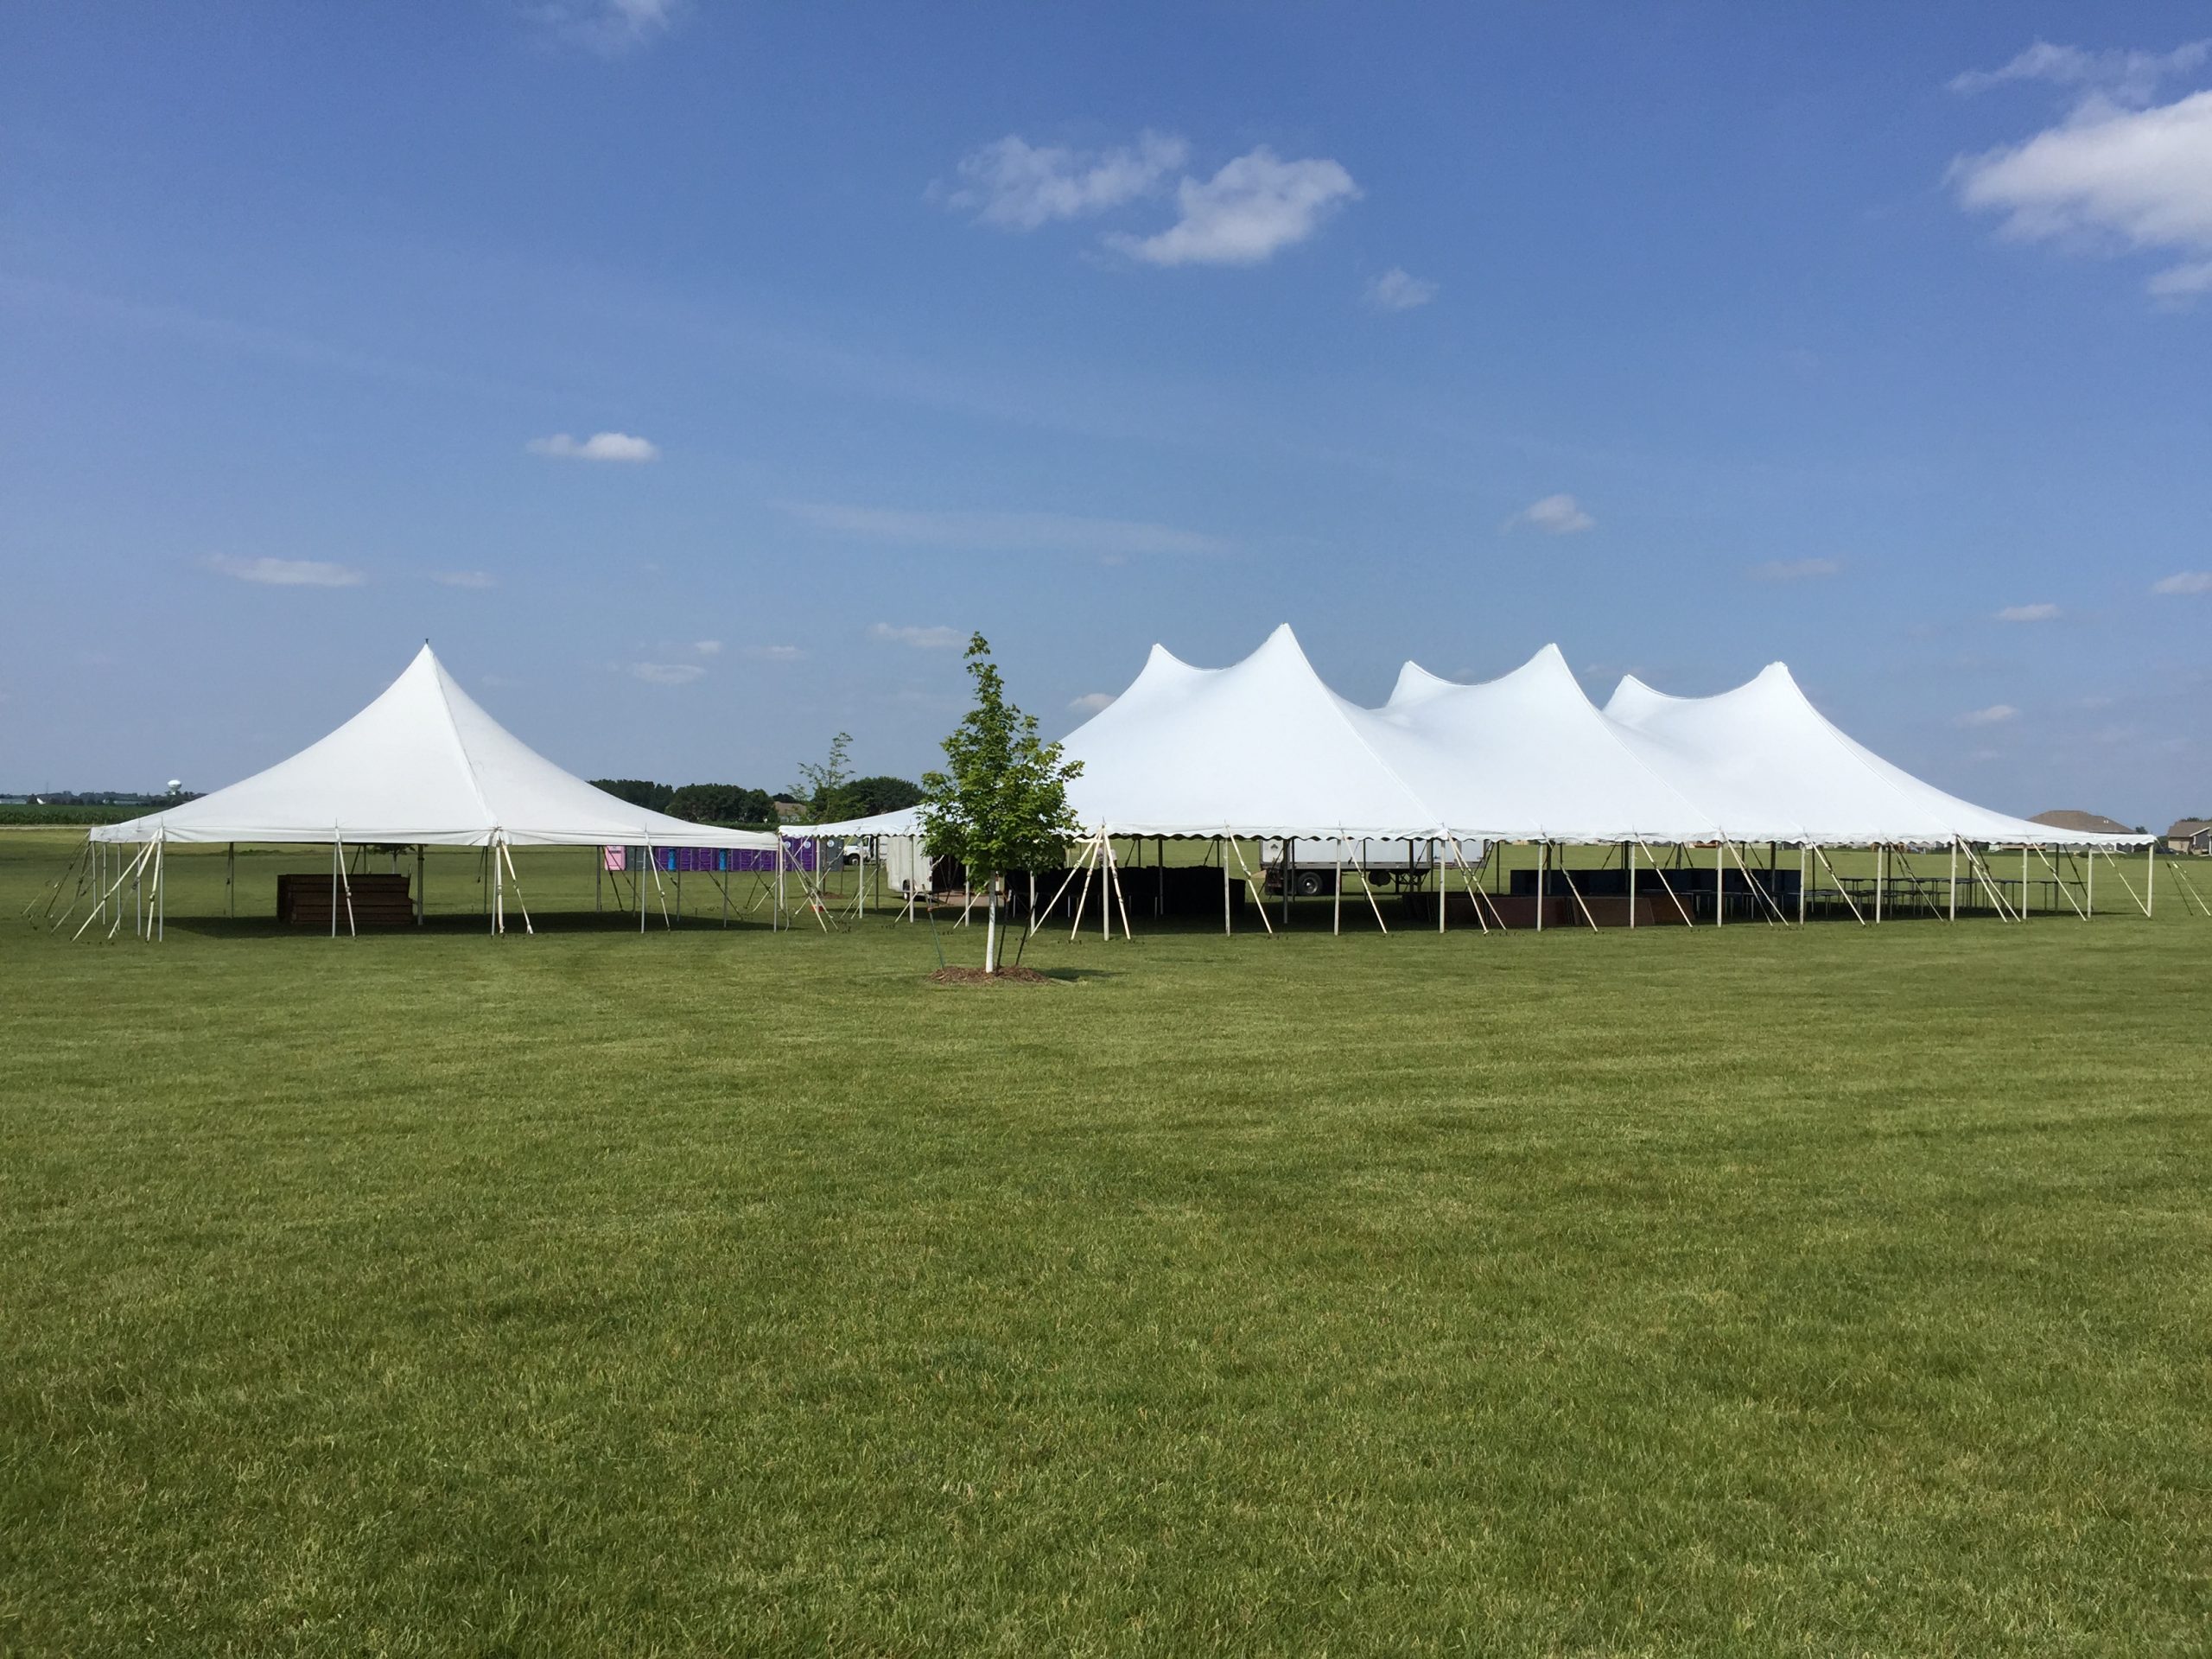 Multiple tents setup for outdoor festival